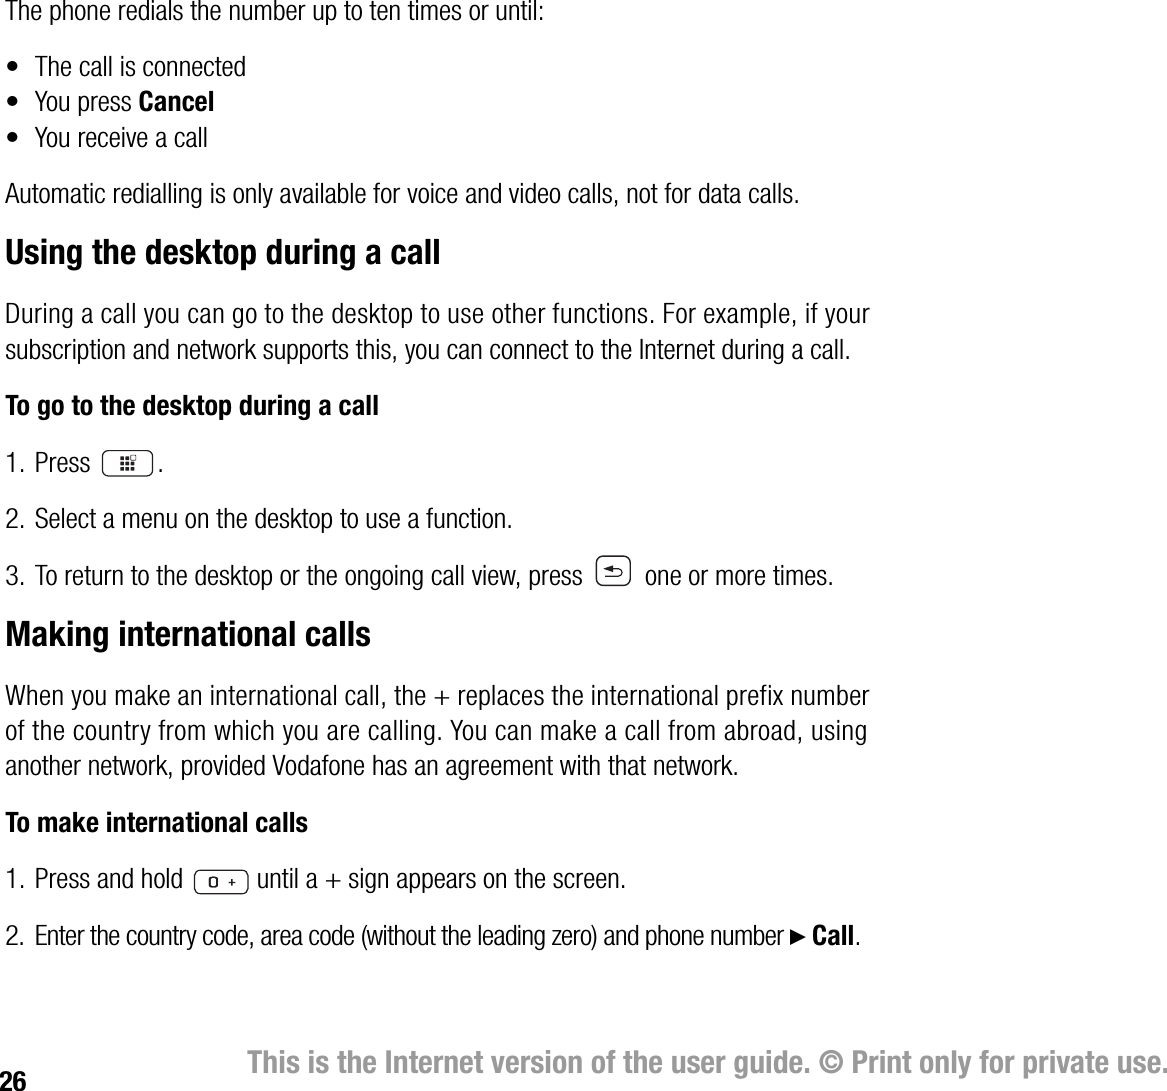 26 This is the Internet version of the user guide. © Print only for private use.The phone redials the number up to ten times or until:• The call is connected• You press Cancel• You receive a callAutomatic redialling is only available for voice and video calls, not for data calls.Using the desktop during a callDuring a call you can go to the desktop to use other functions. For example, if your subscription and network supports this, you can connect to the Internet during a call.To go to the desktop during a call1. Press .2. Select a menu on the desktop to use a function.3. To return to the desktop or the ongoing call view, press   one or more times.Making international callsWhen you make an international call, the + replaces the international prefix number of the country from which you are calling. You can make a call from abroad, using another network, provided Vodafone has an agreement with that network.To make international calls1. Press and hold   until a + sign appears on the screen.2. Enter the country code, area code (without the leading zero) and phone number } Call. 